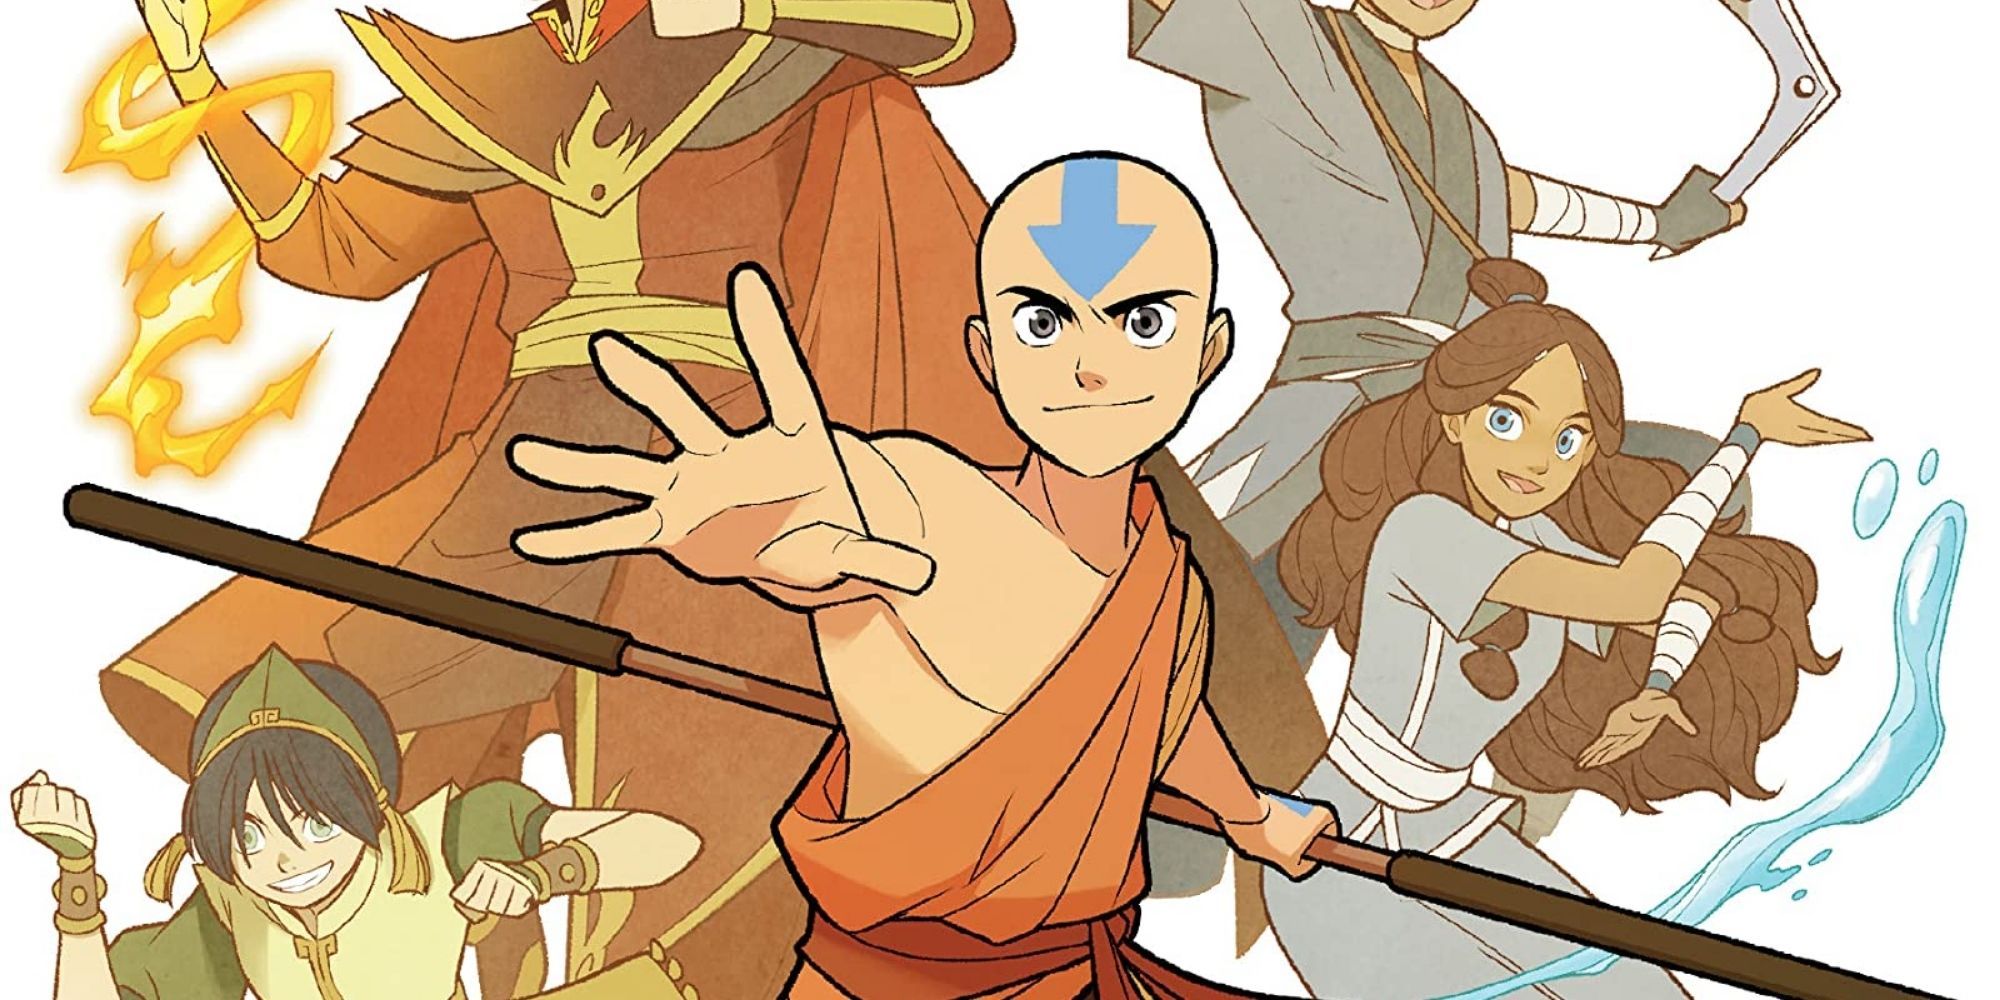 Aang smiles on the cover of Avatar the Last Airbender Comics